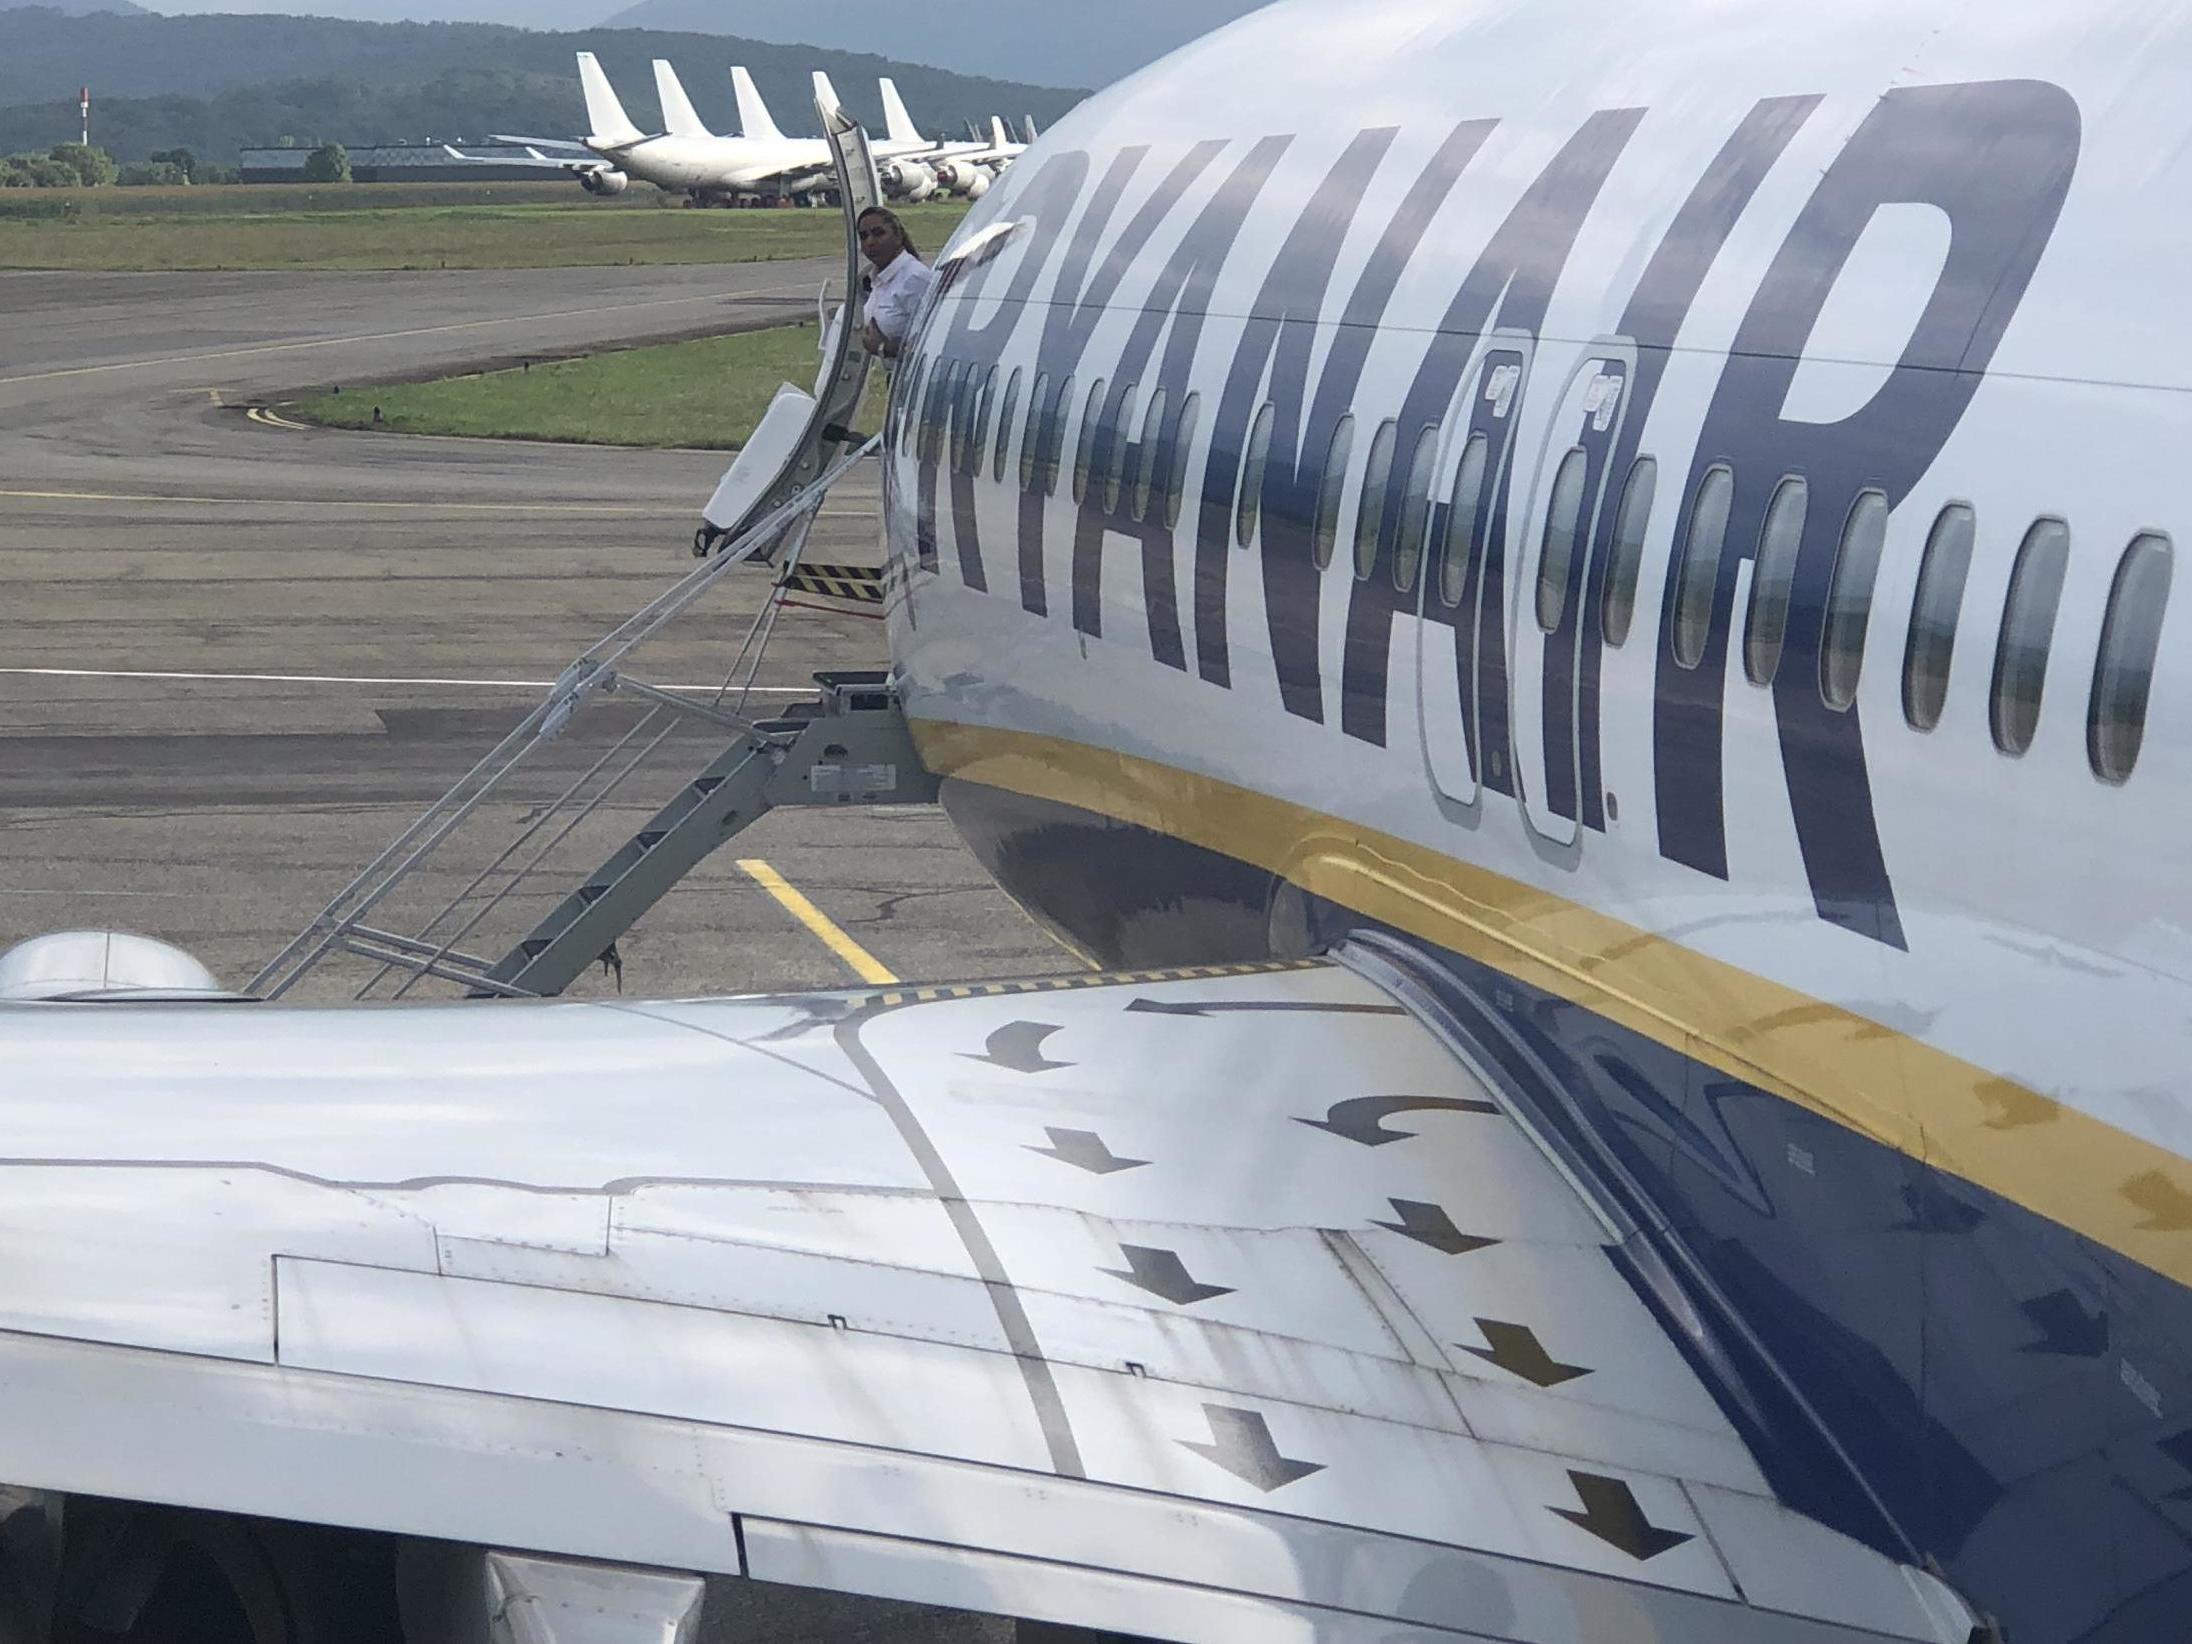 Wing and a prayer? Ryanair Boeing 737 at Lourdes Airport in southern France